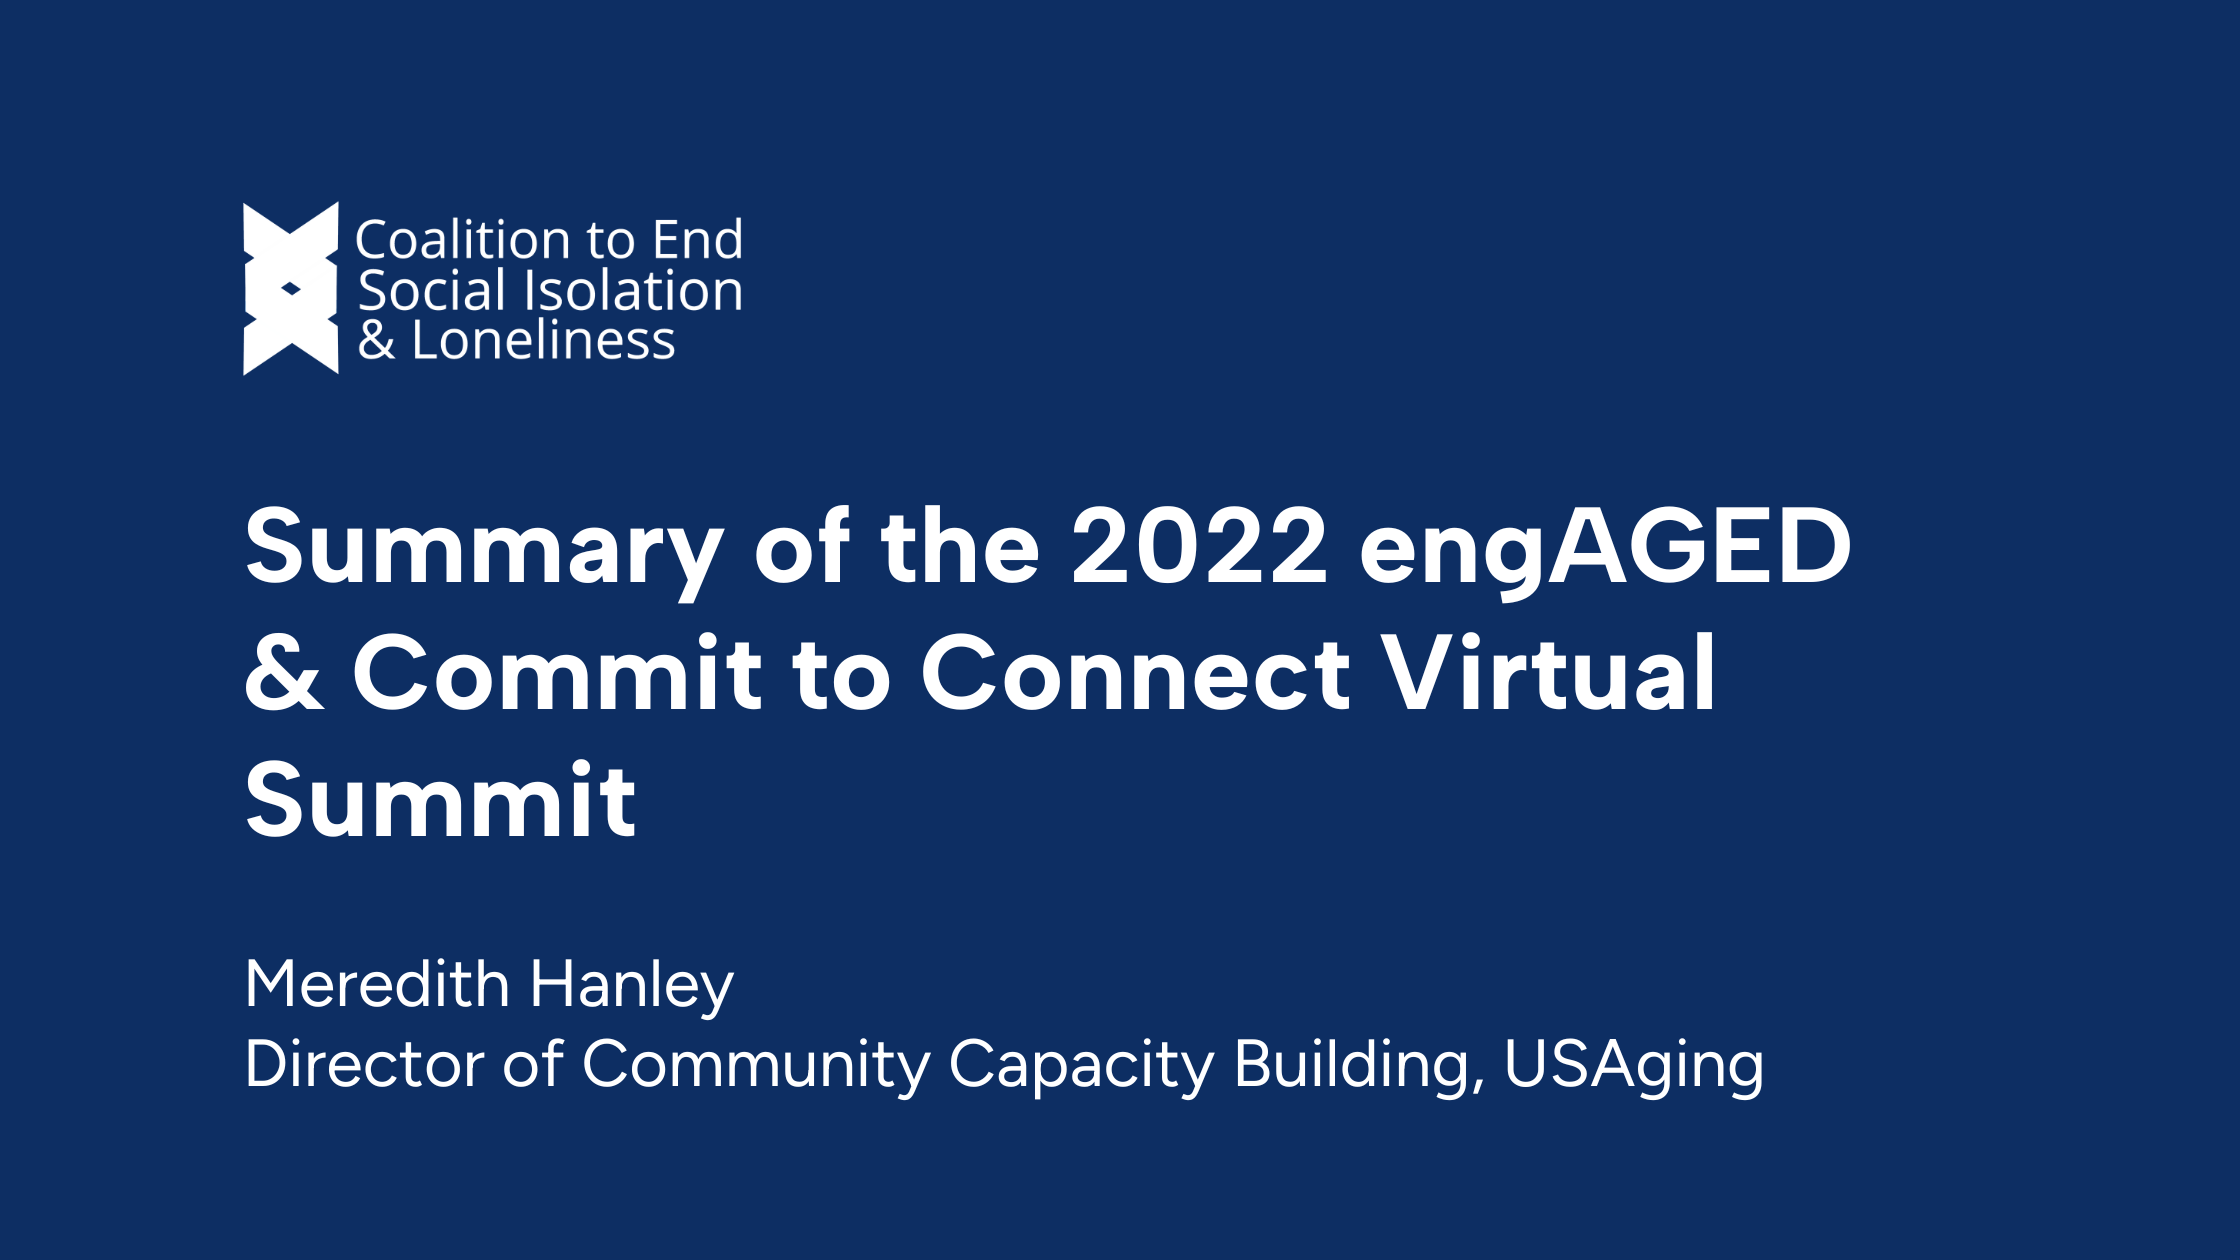 Summary of the 2022 engAGED and Commit to Connect Virtual Summit